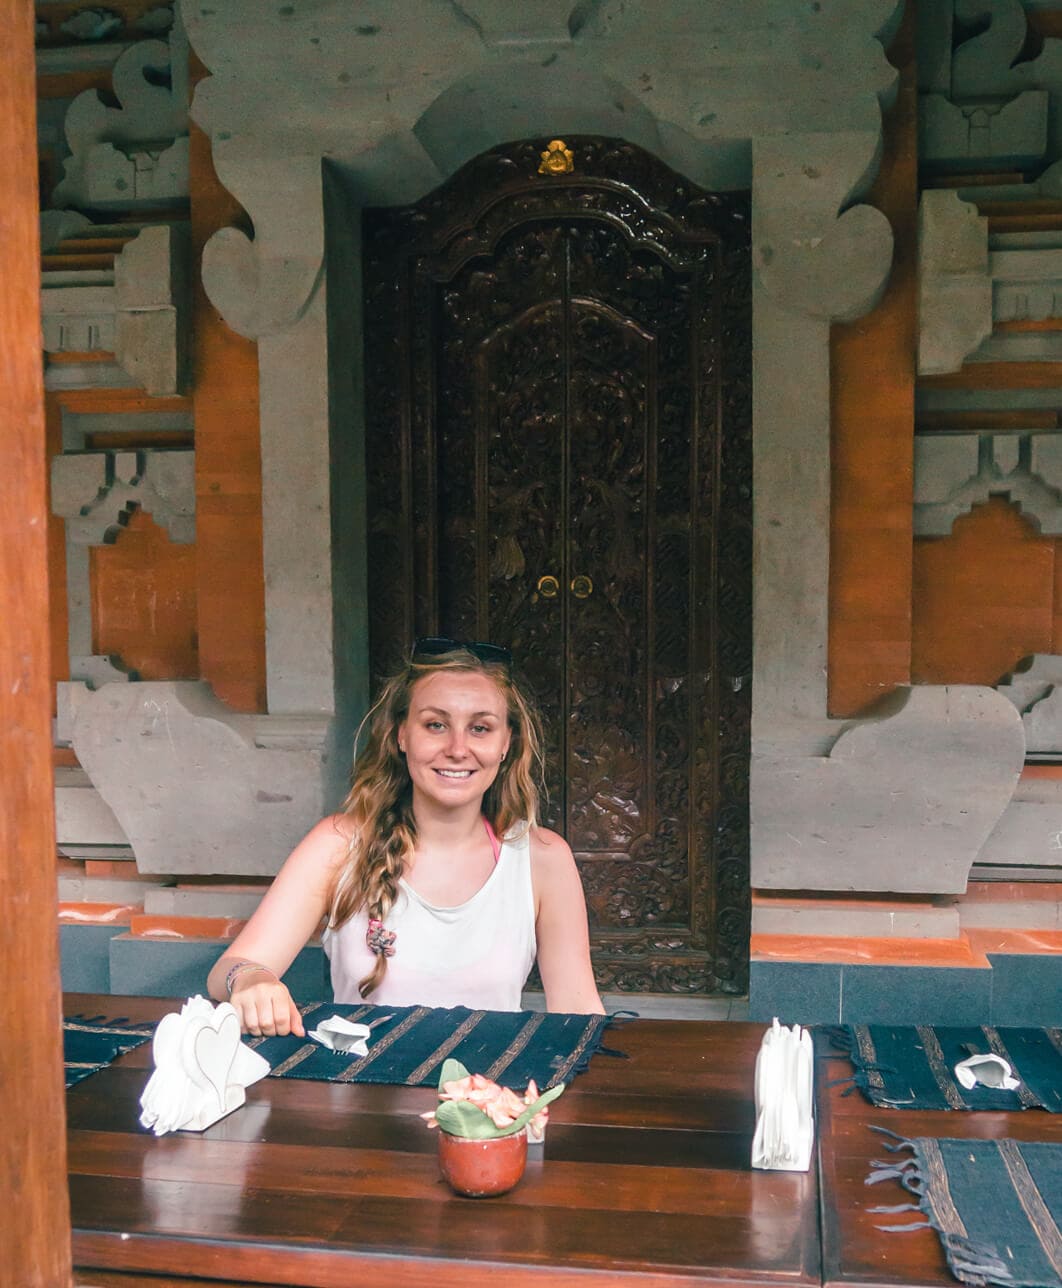 Travel bloggers reveal their favorite experiences in the world - Bike tour and lunch in a traditional Balinese family compound